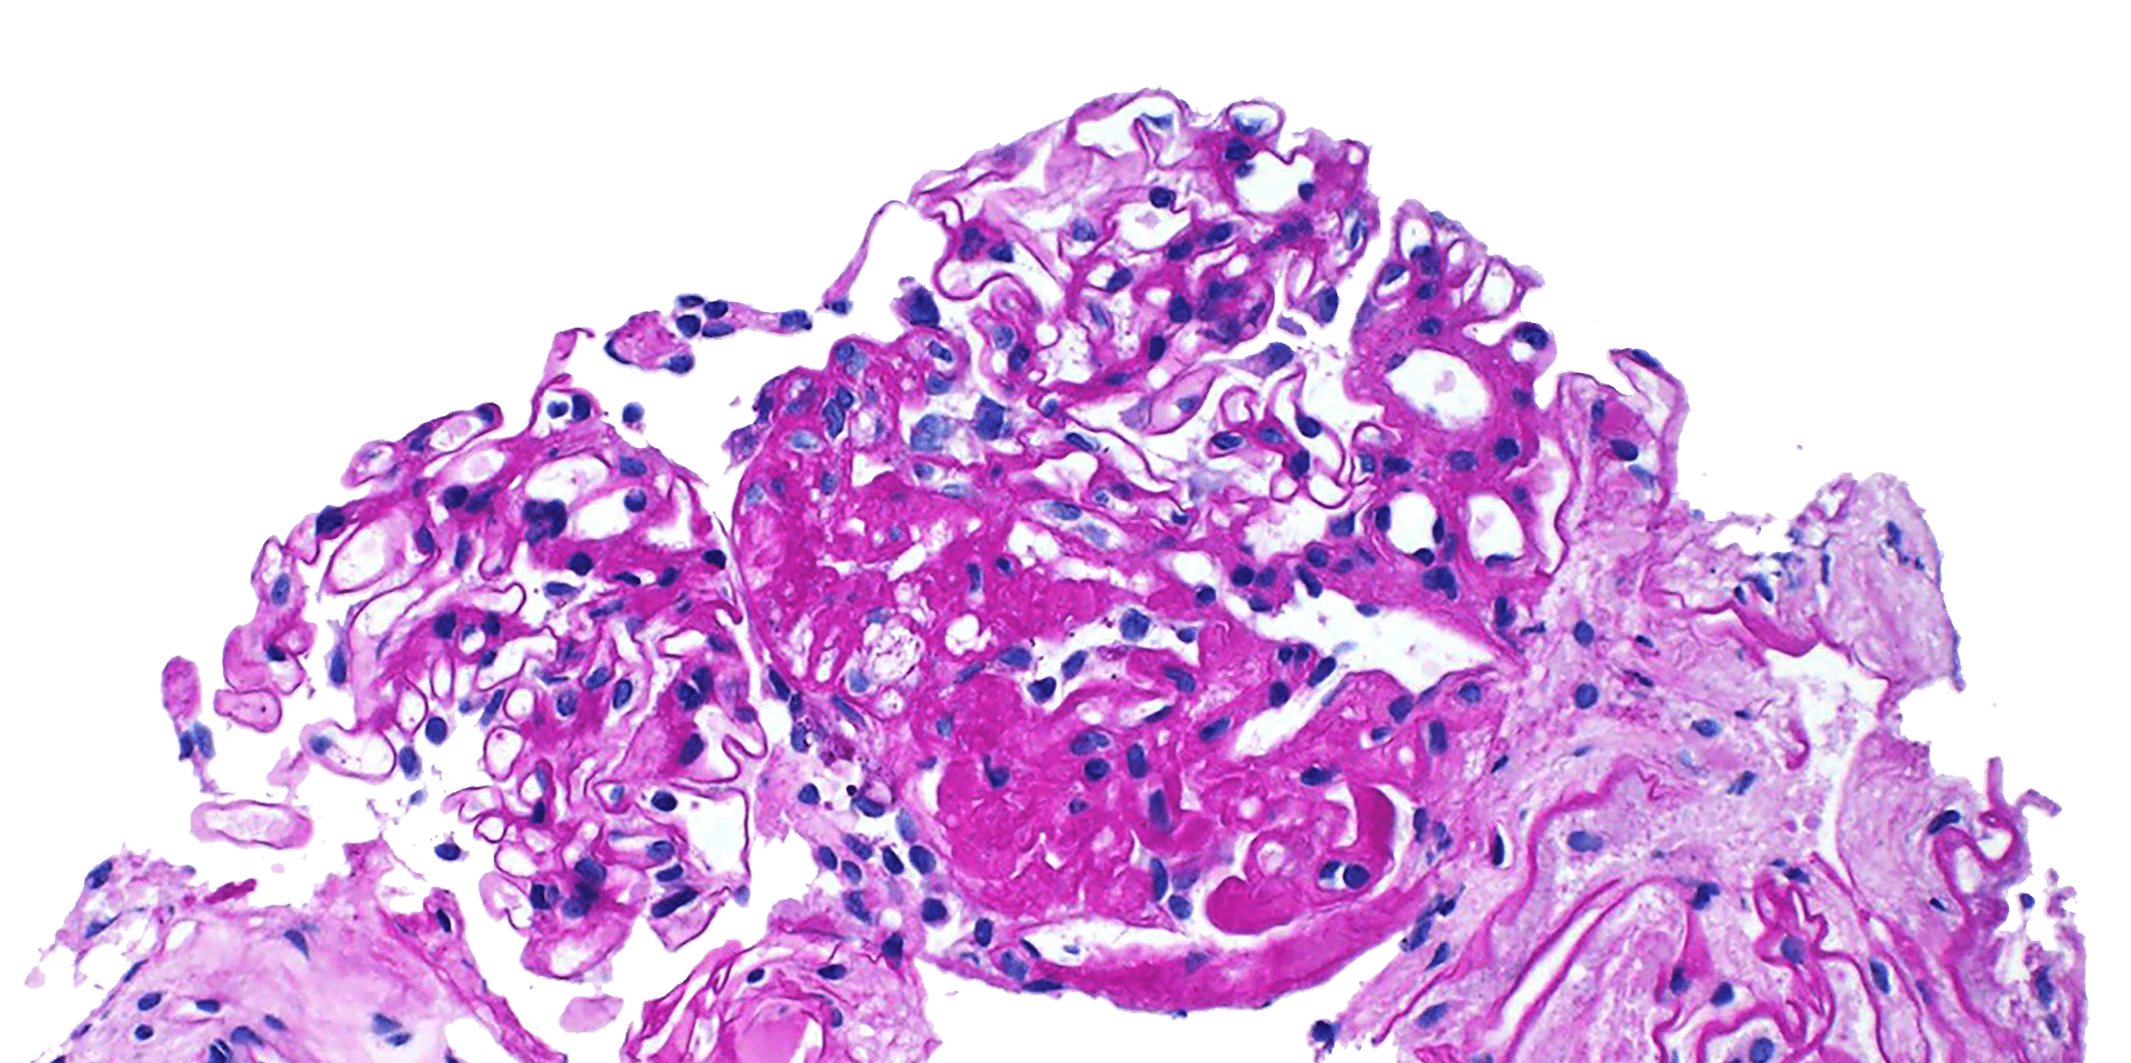 diagnostic image of a renal biopsy sent to arkana laboratories showing glomerulus